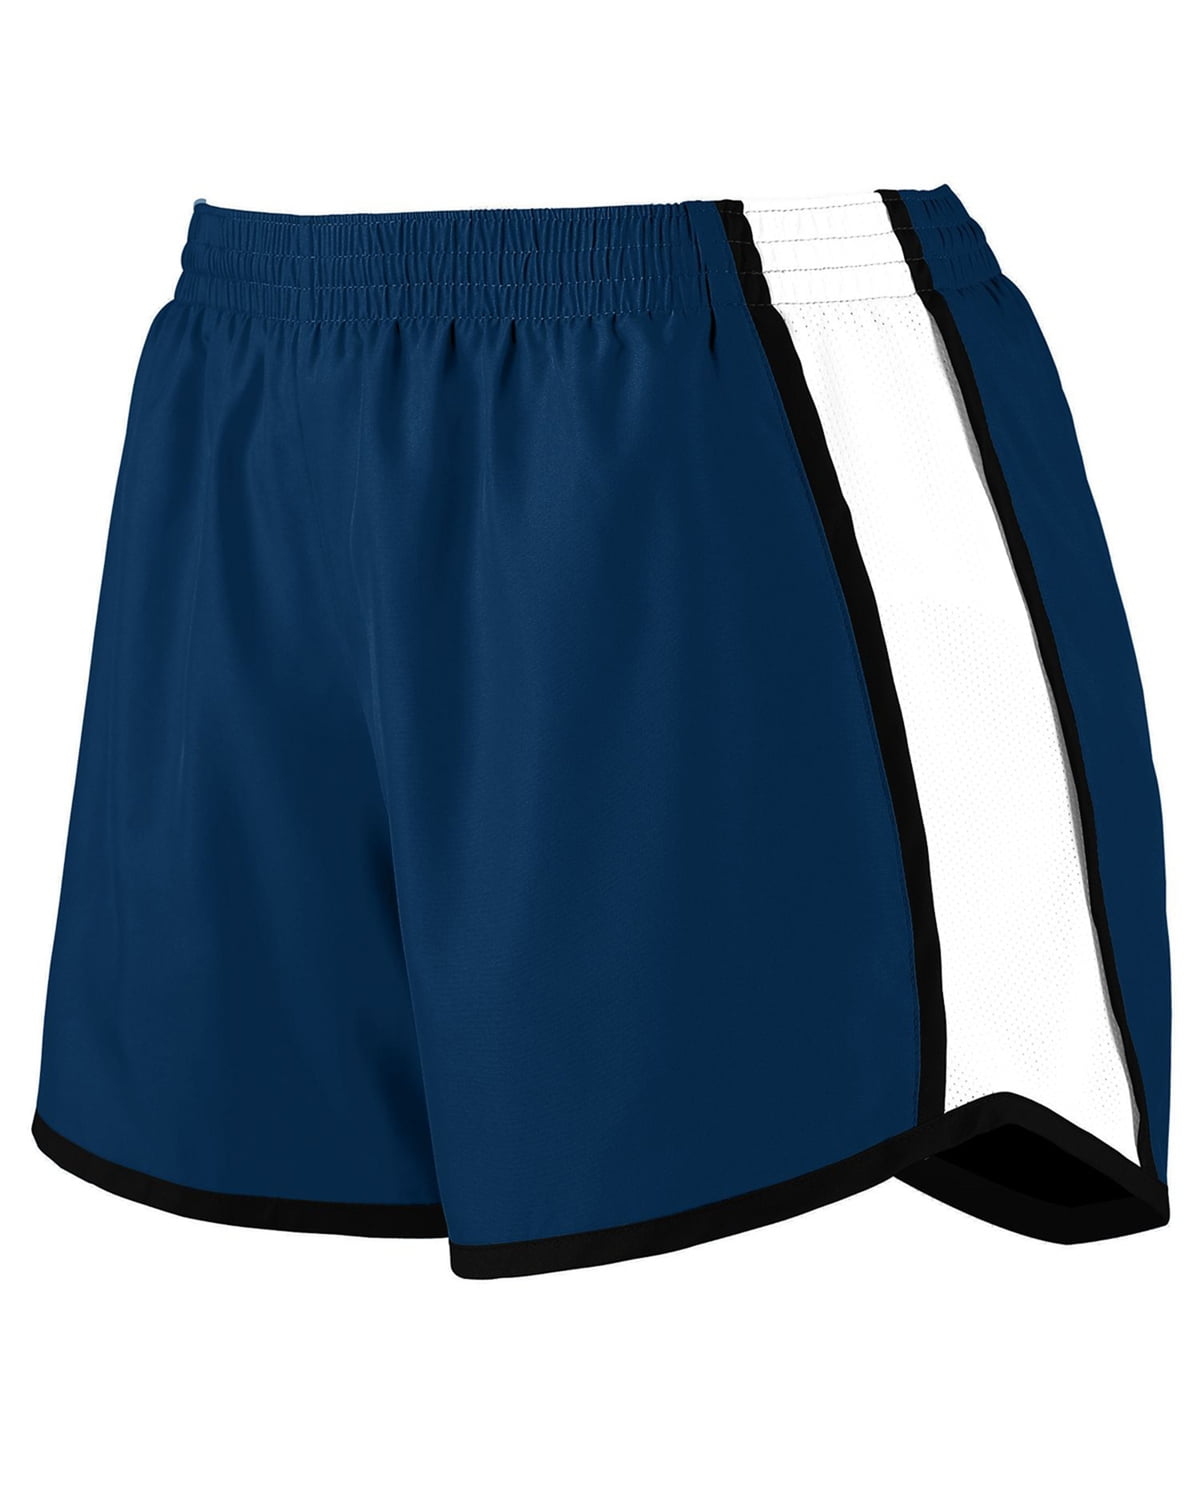 White And Blue Basketball Shorts